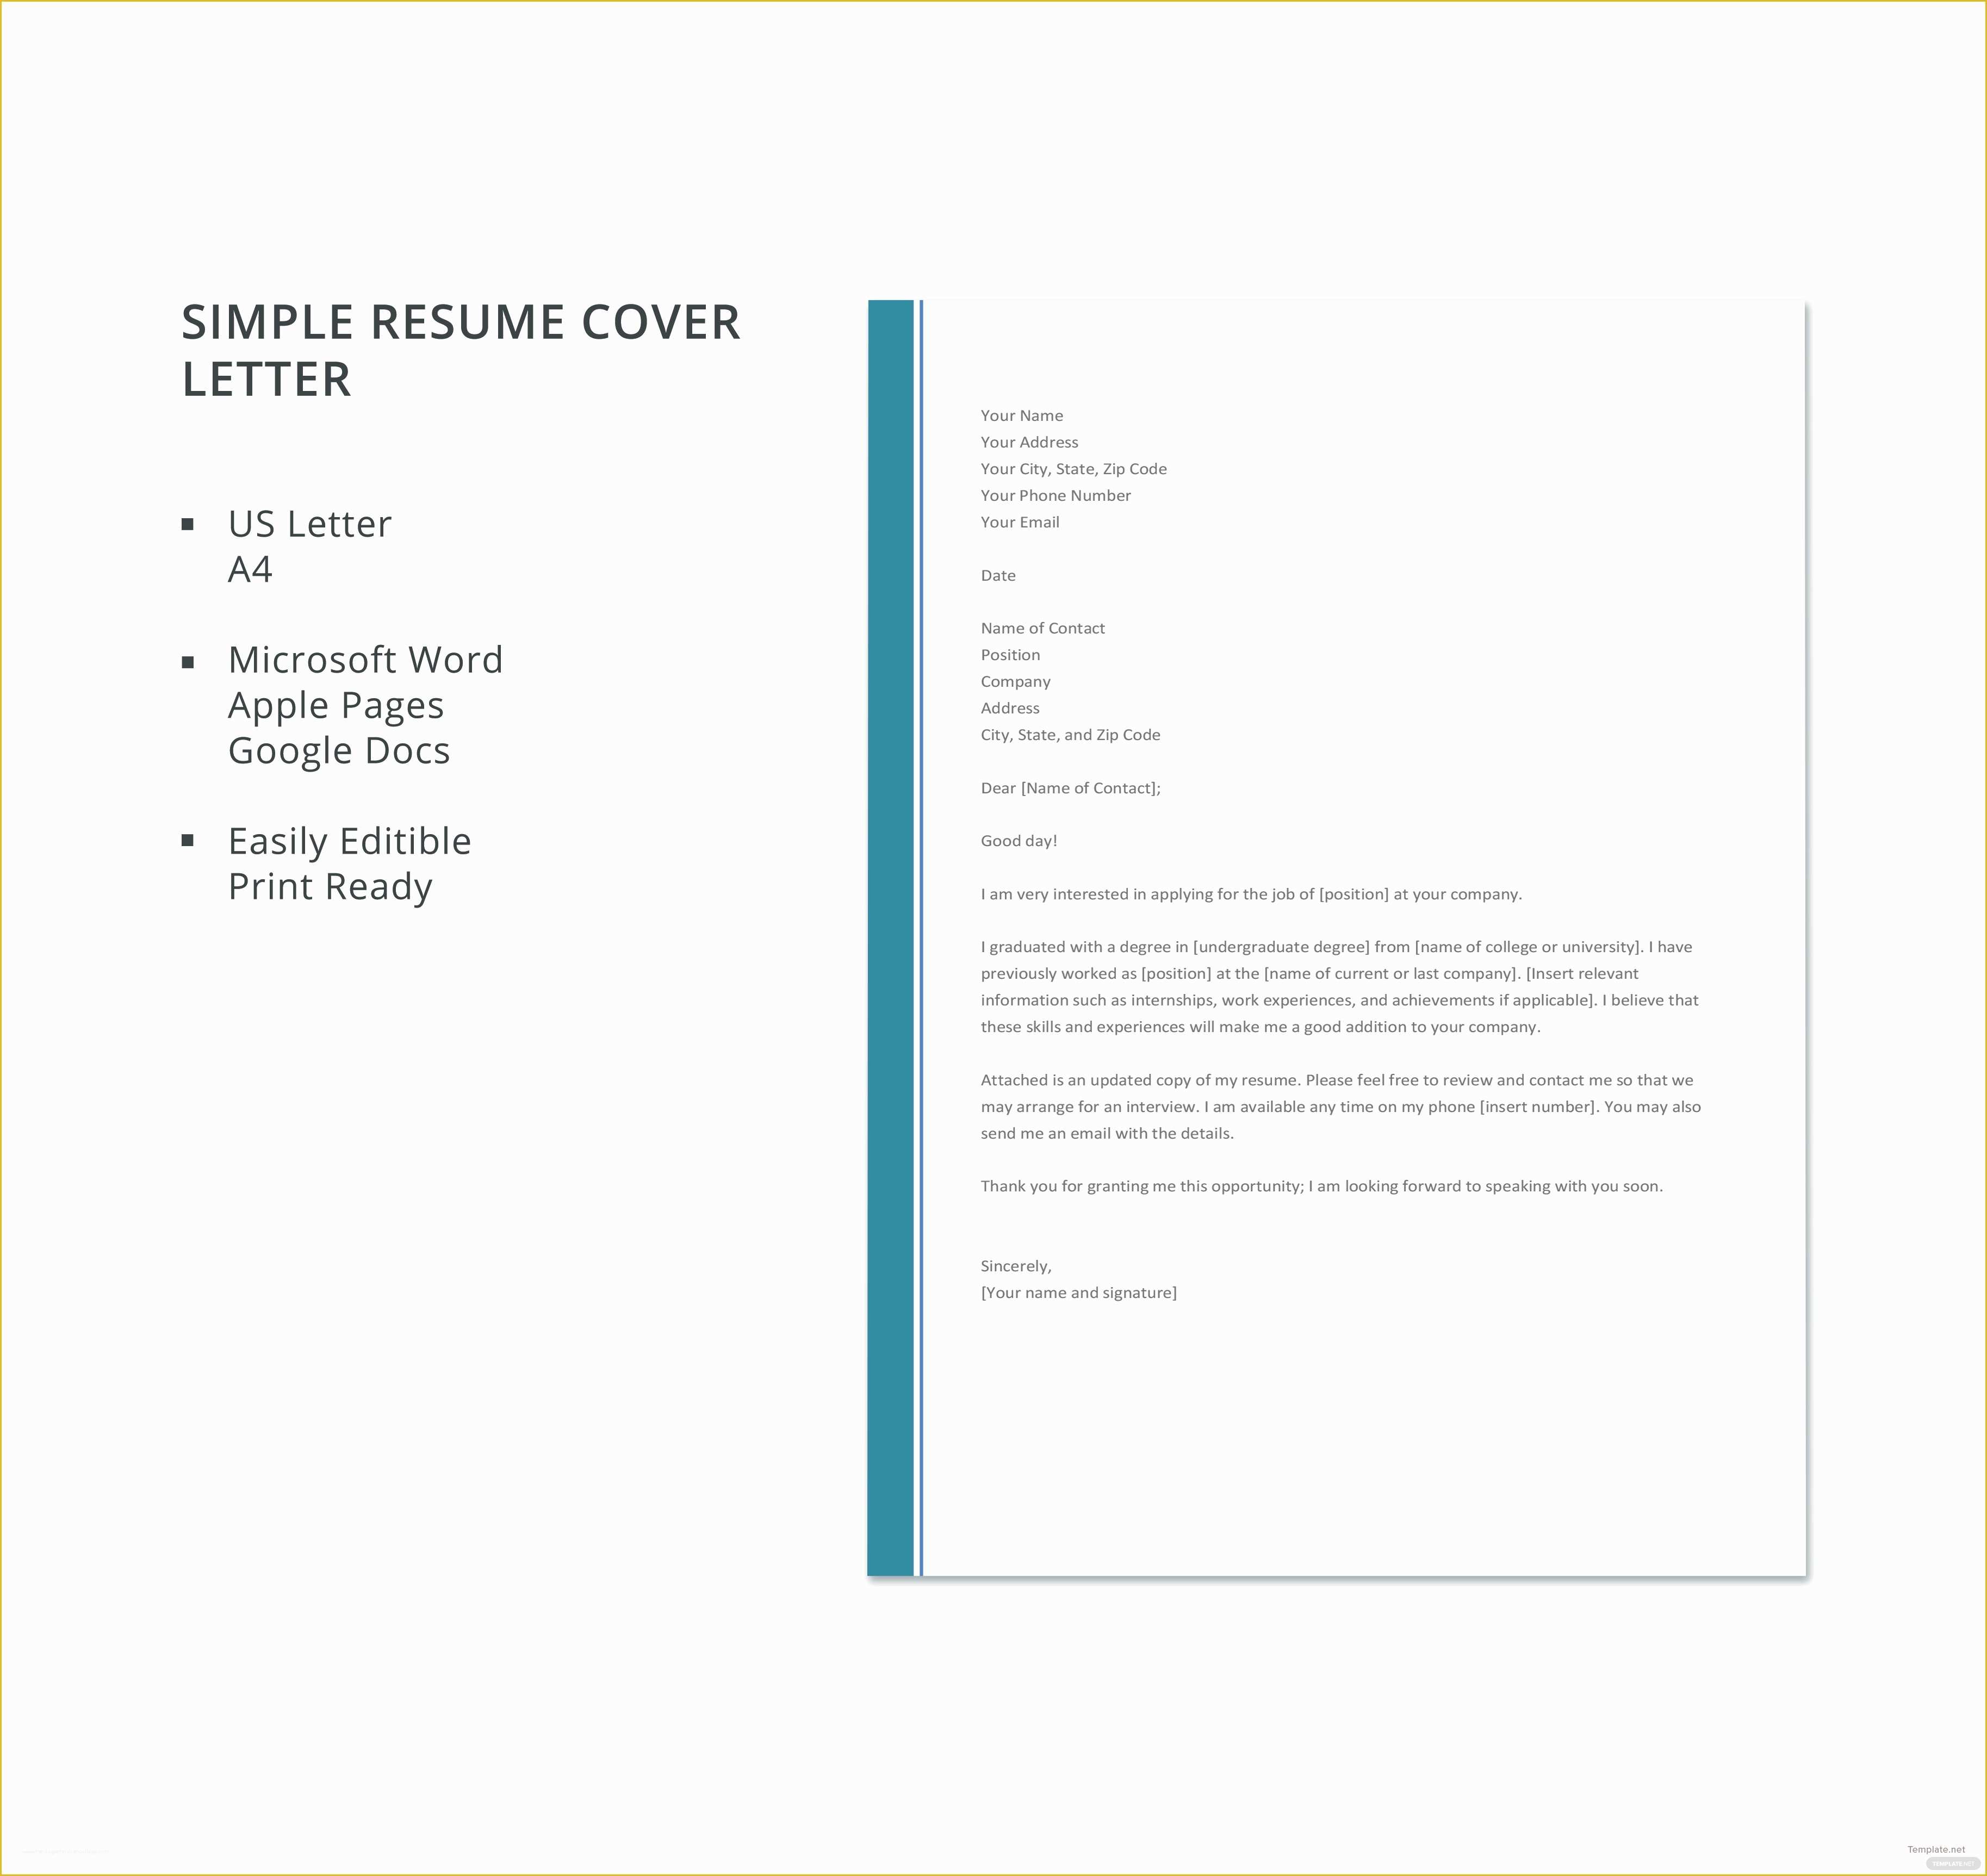 Free Cover Letter Template Of Free Simple Resume Cover Letter Template In Microsoft Word